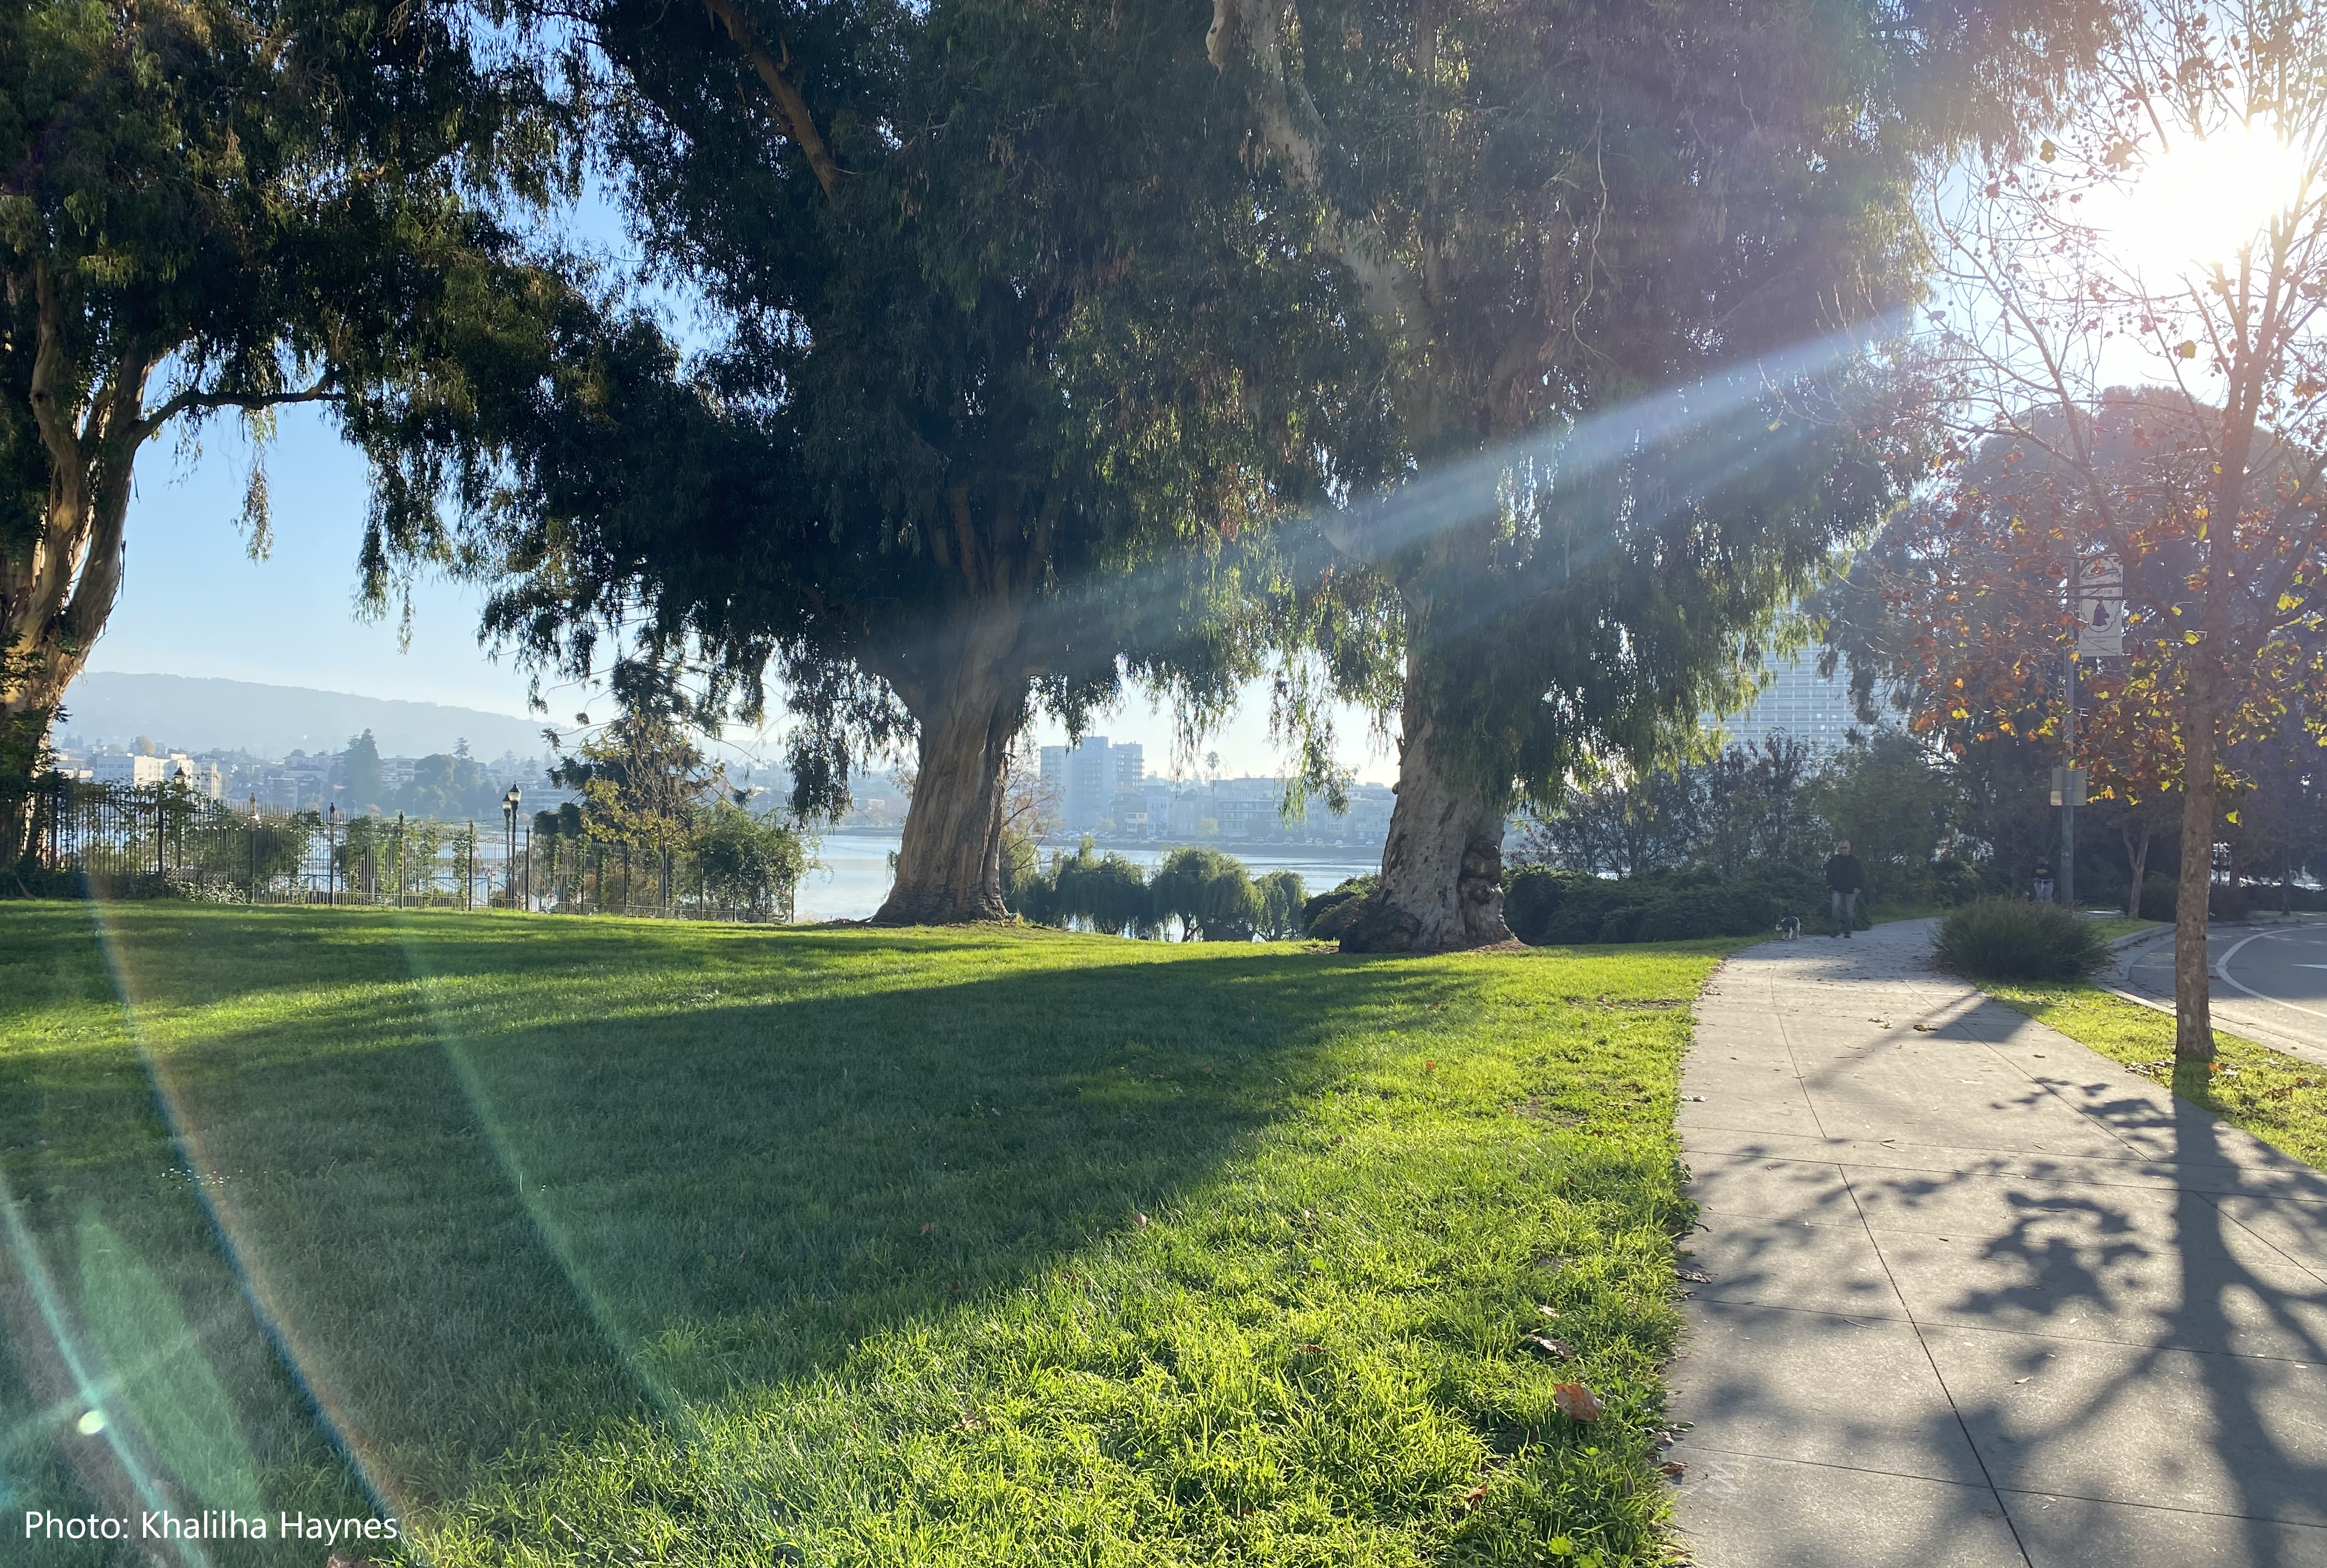 Sun Shining on lawn with trees by Lake Merritt